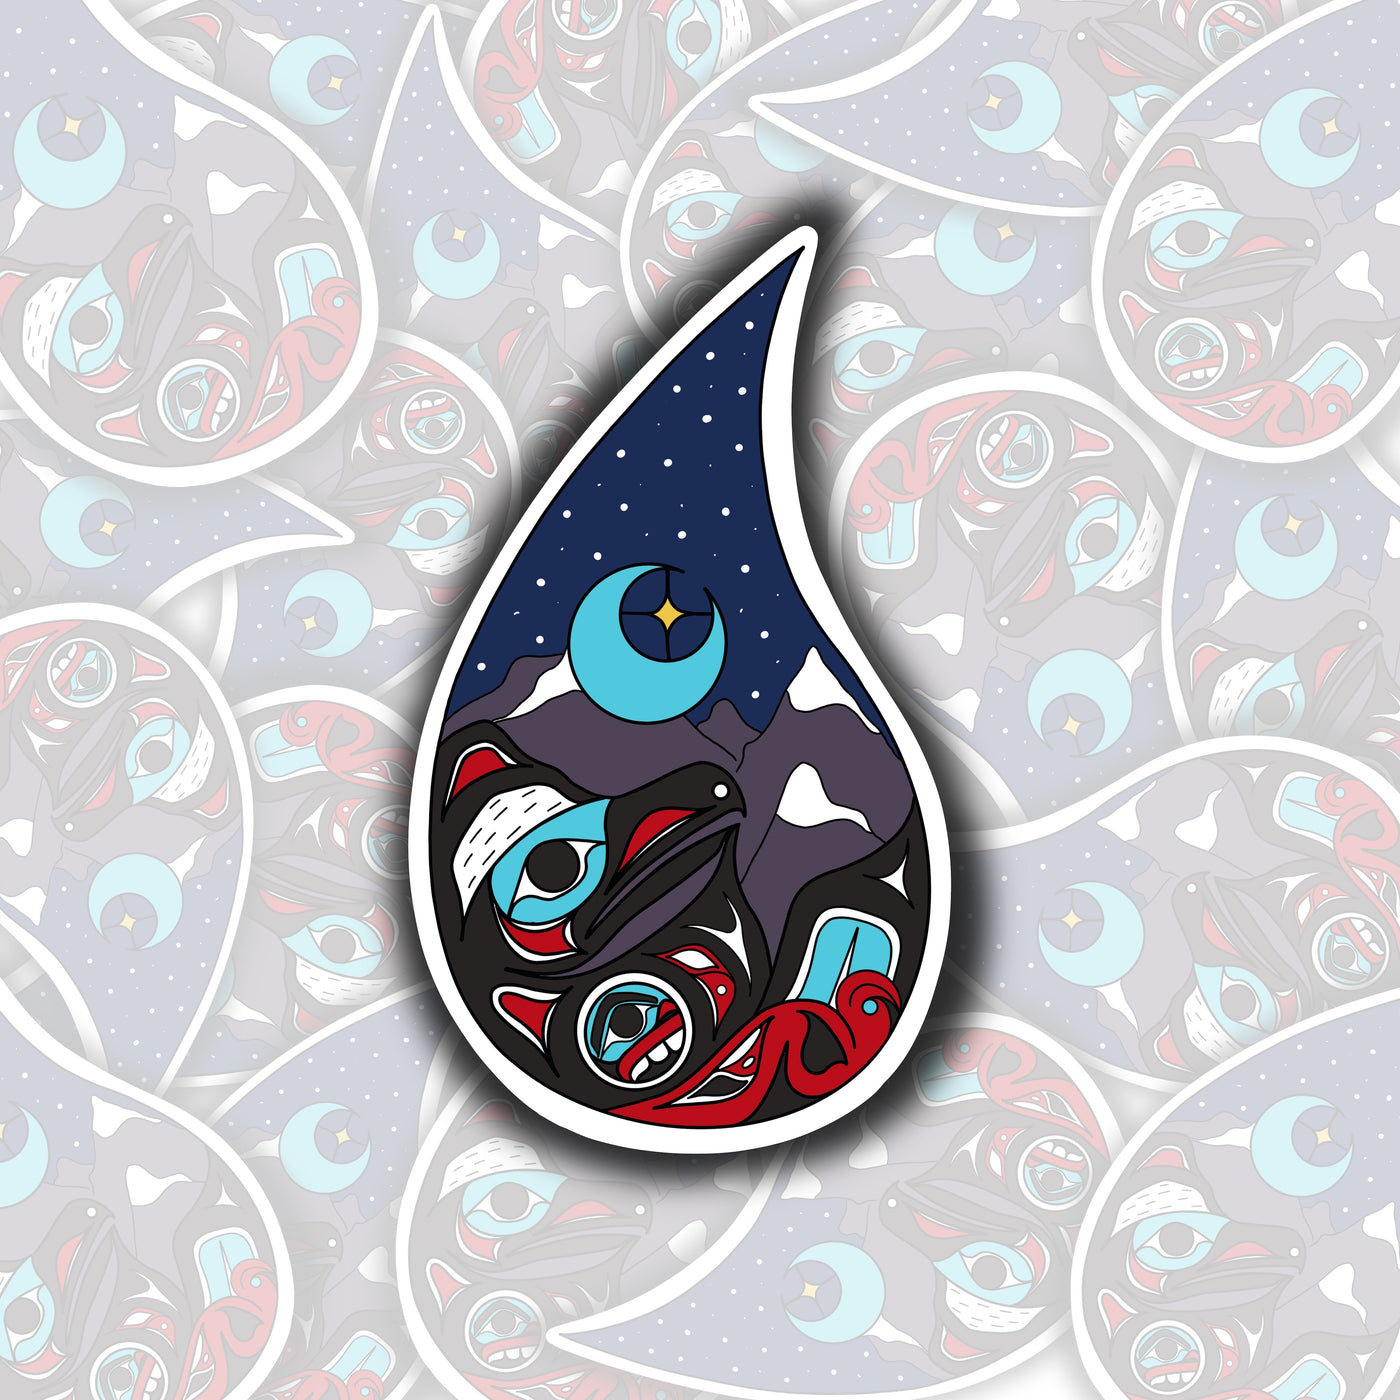 Sticker is shaped like a raindrop. Inside raindrop are mountains, the moon and stars, and a raven at the bottom of the raindrop. 